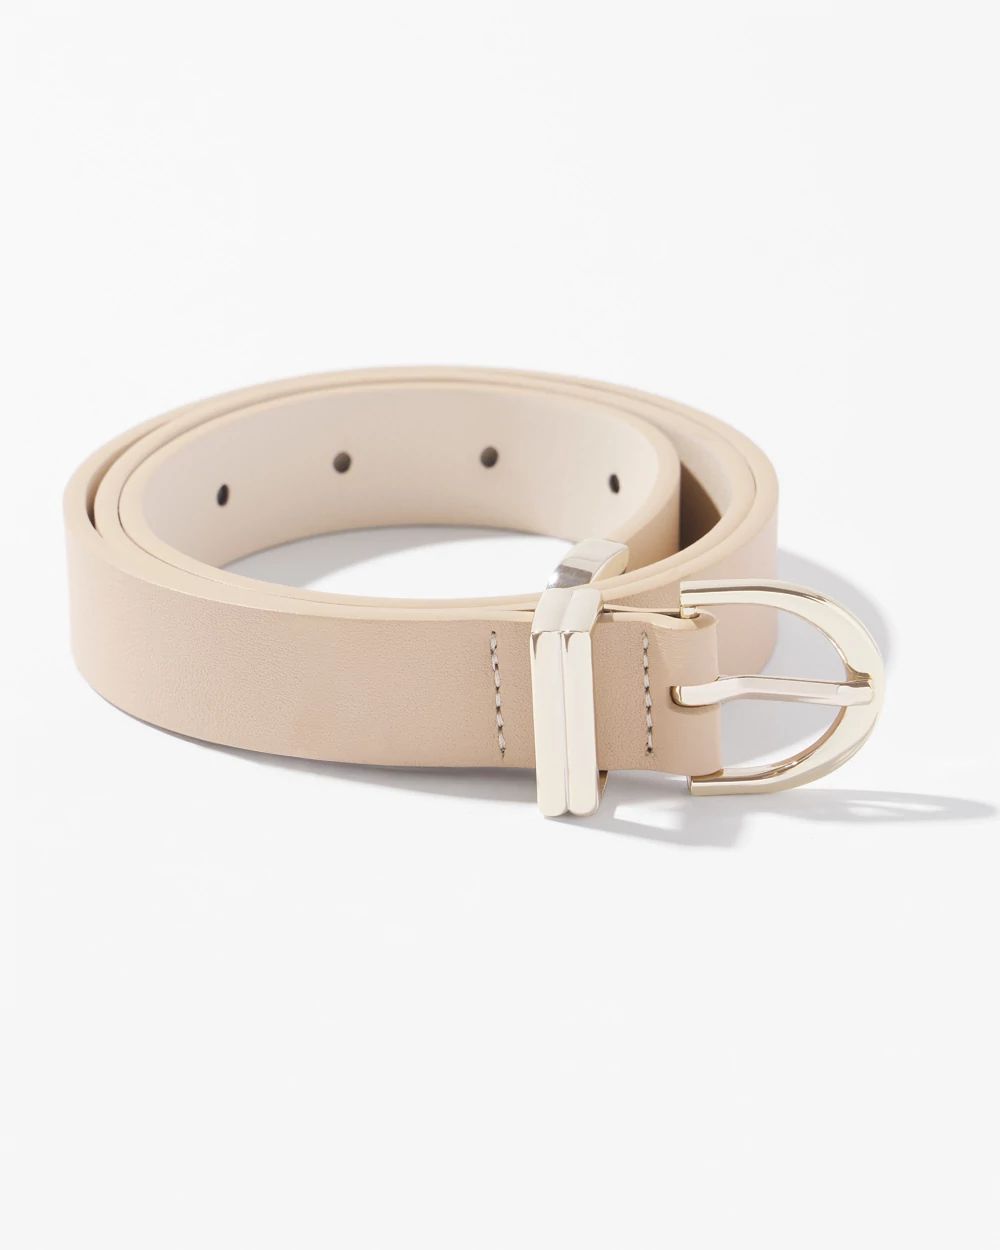 Capped Leather Pant Belt